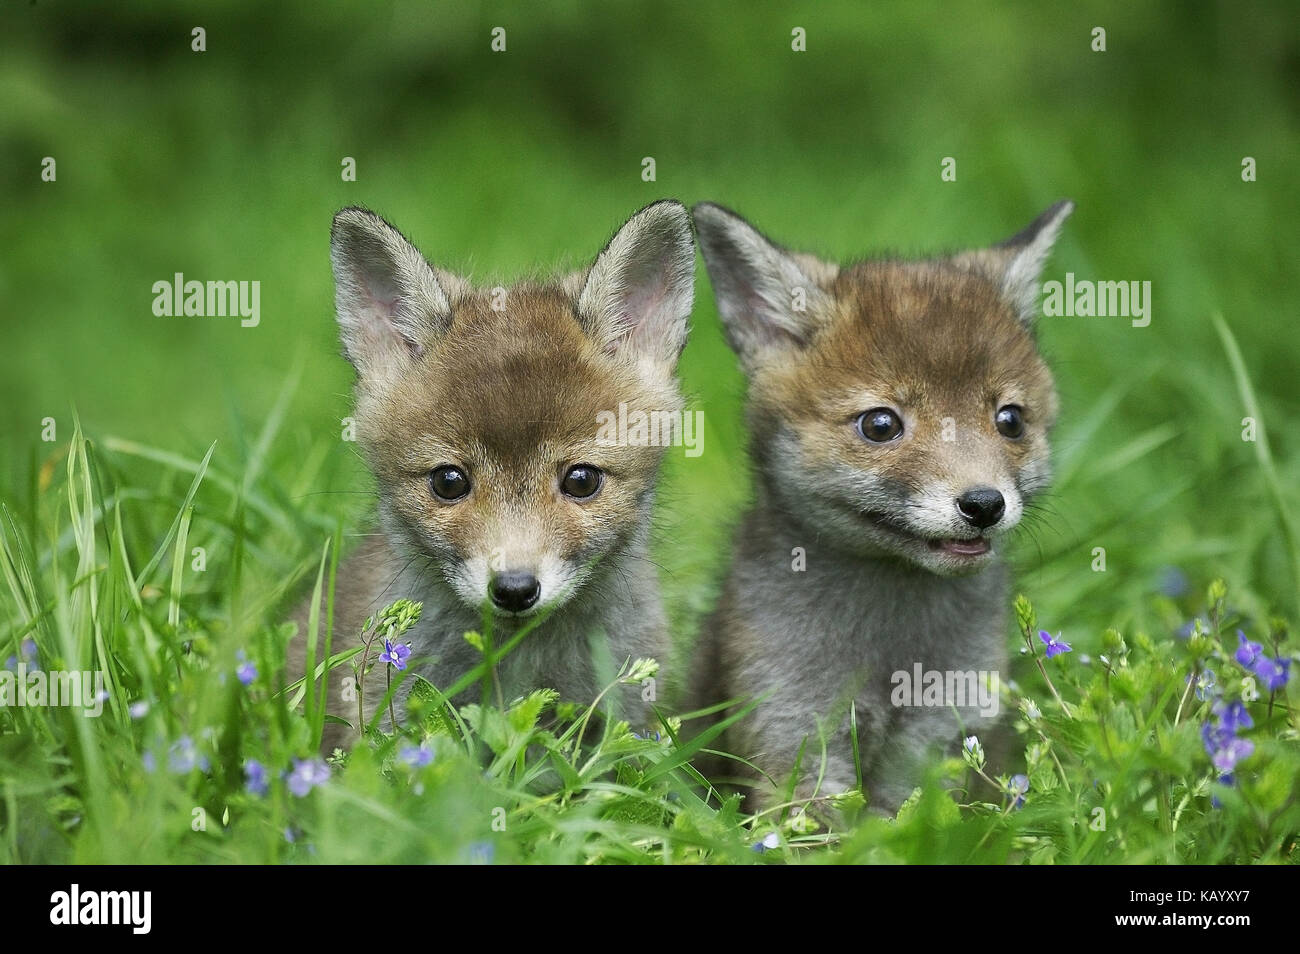 Red fox, Vulpes vulpes, two young animals in the grass, Stock Photo